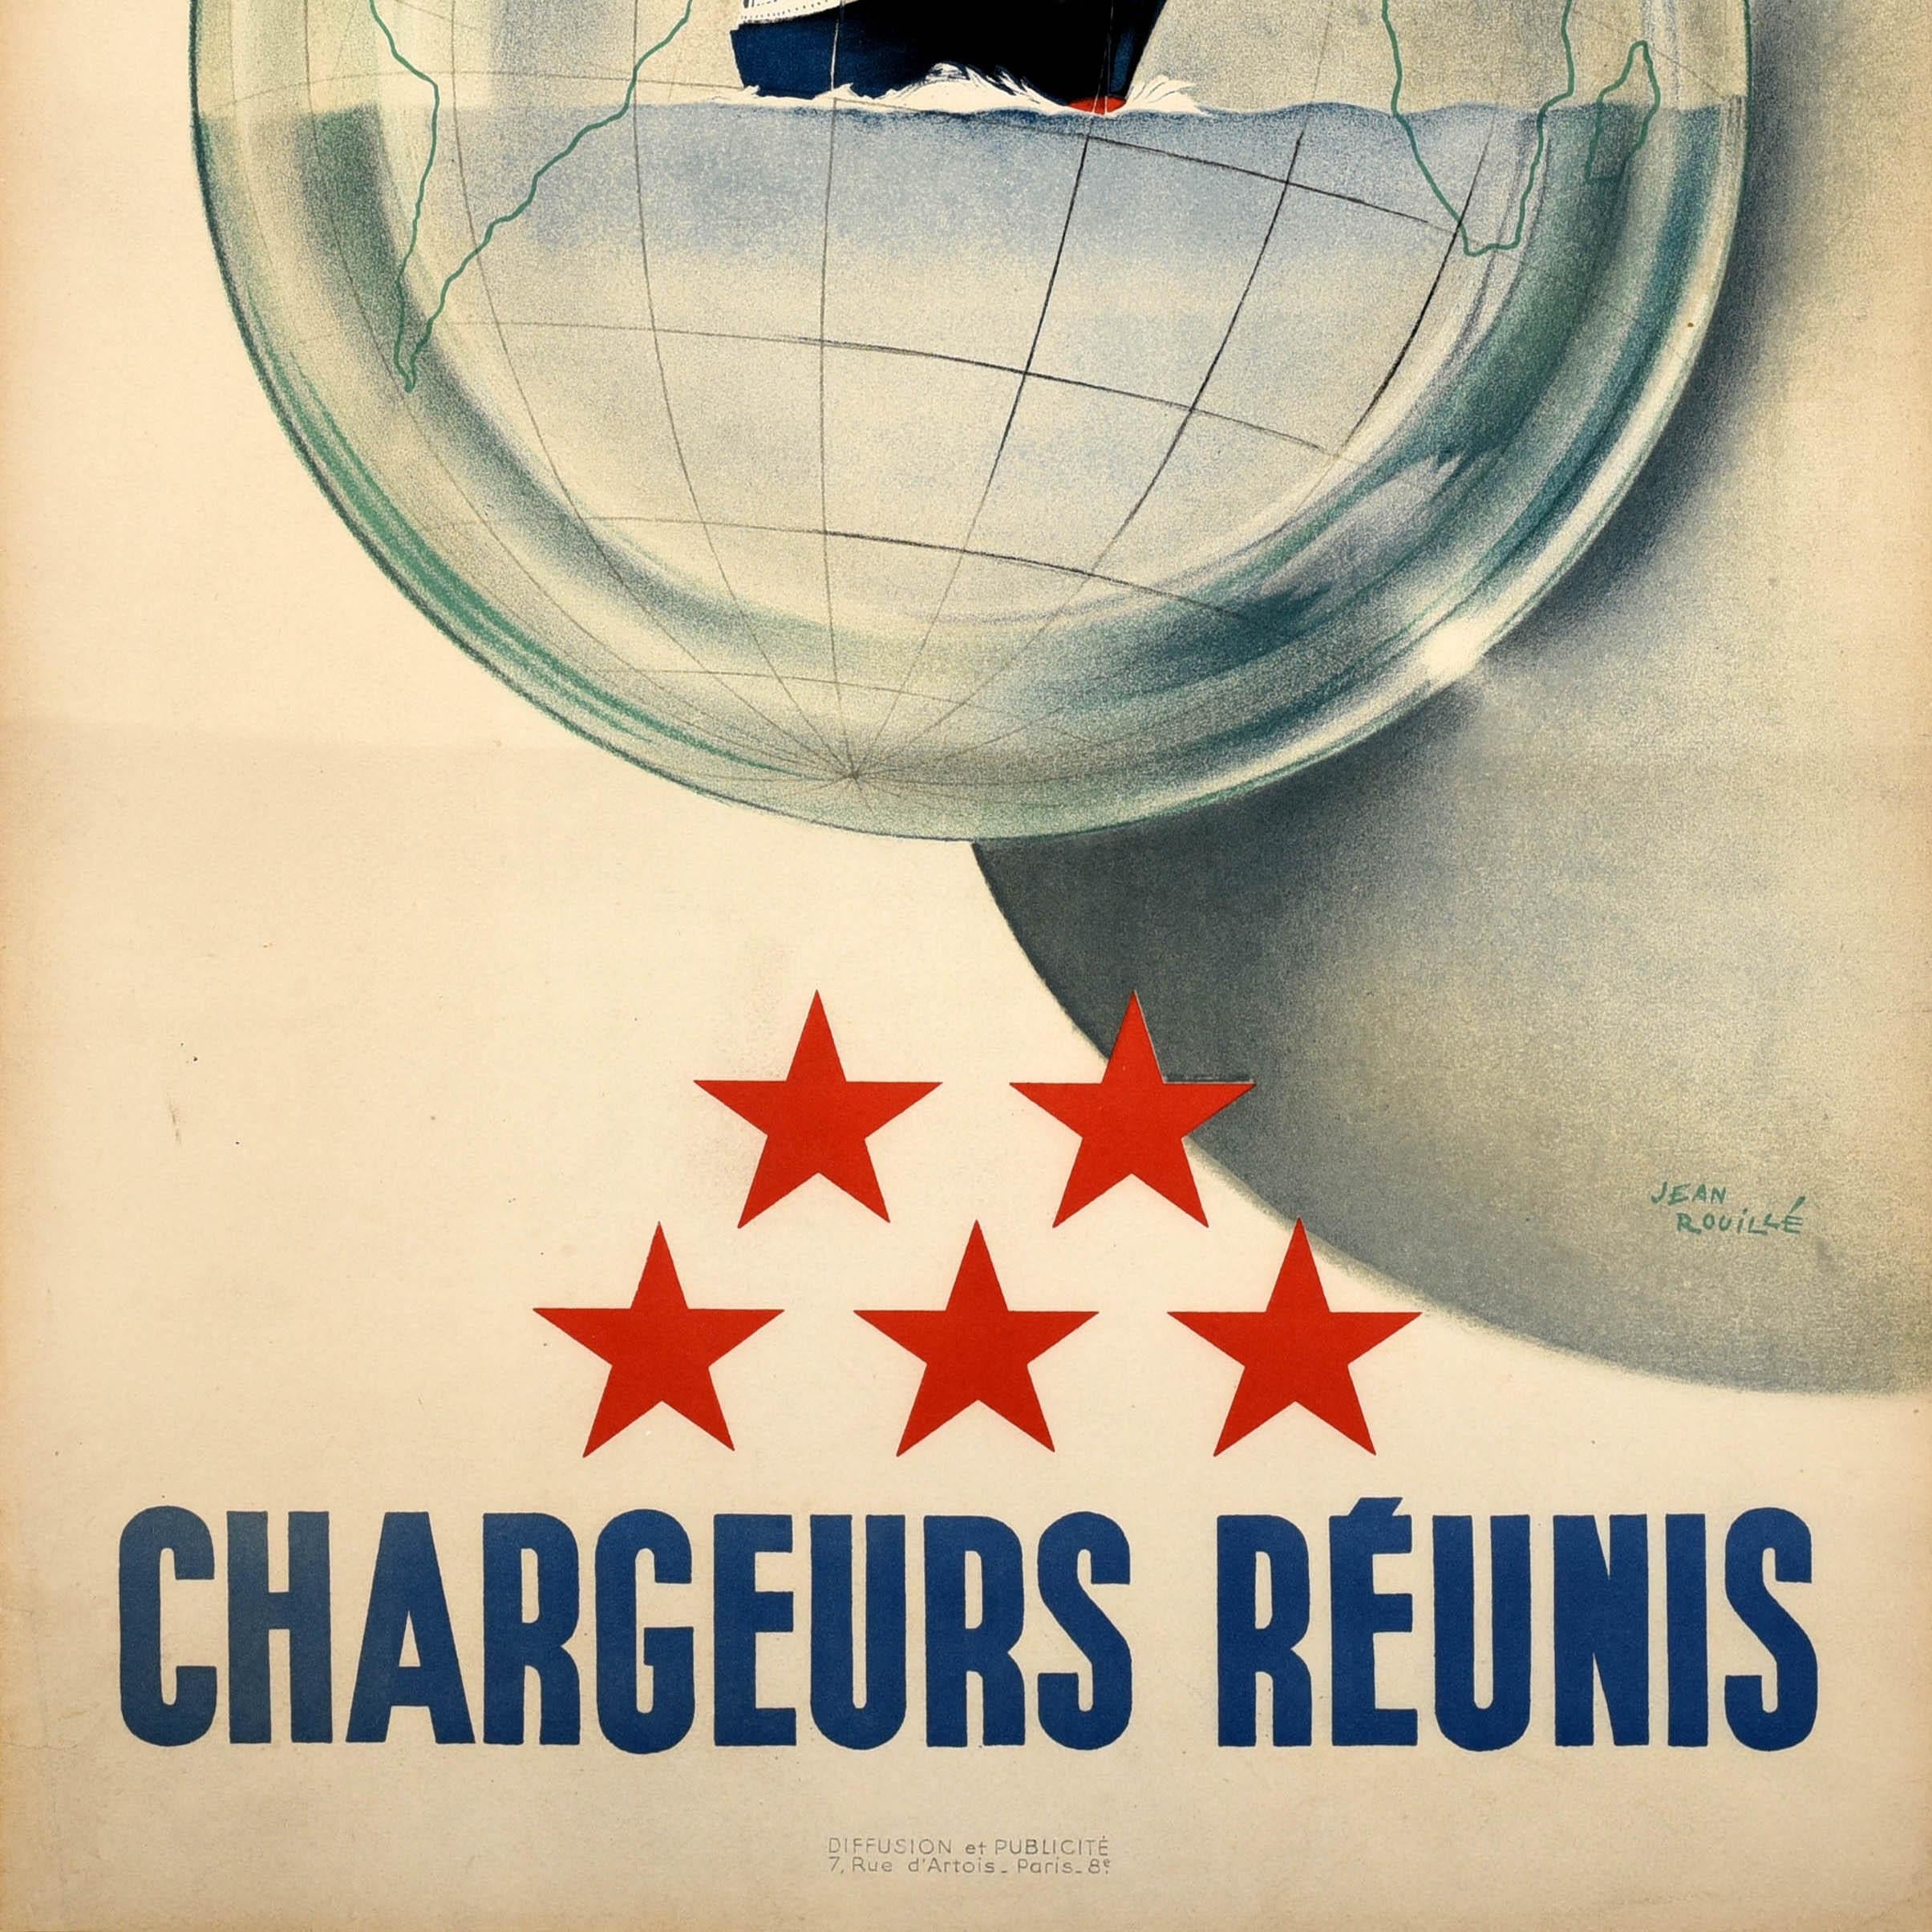 Original Vintage Travel Advertising Poster Chargeurs Reunis Sailing Jean Rouille In Good Condition For Sale In London, GB